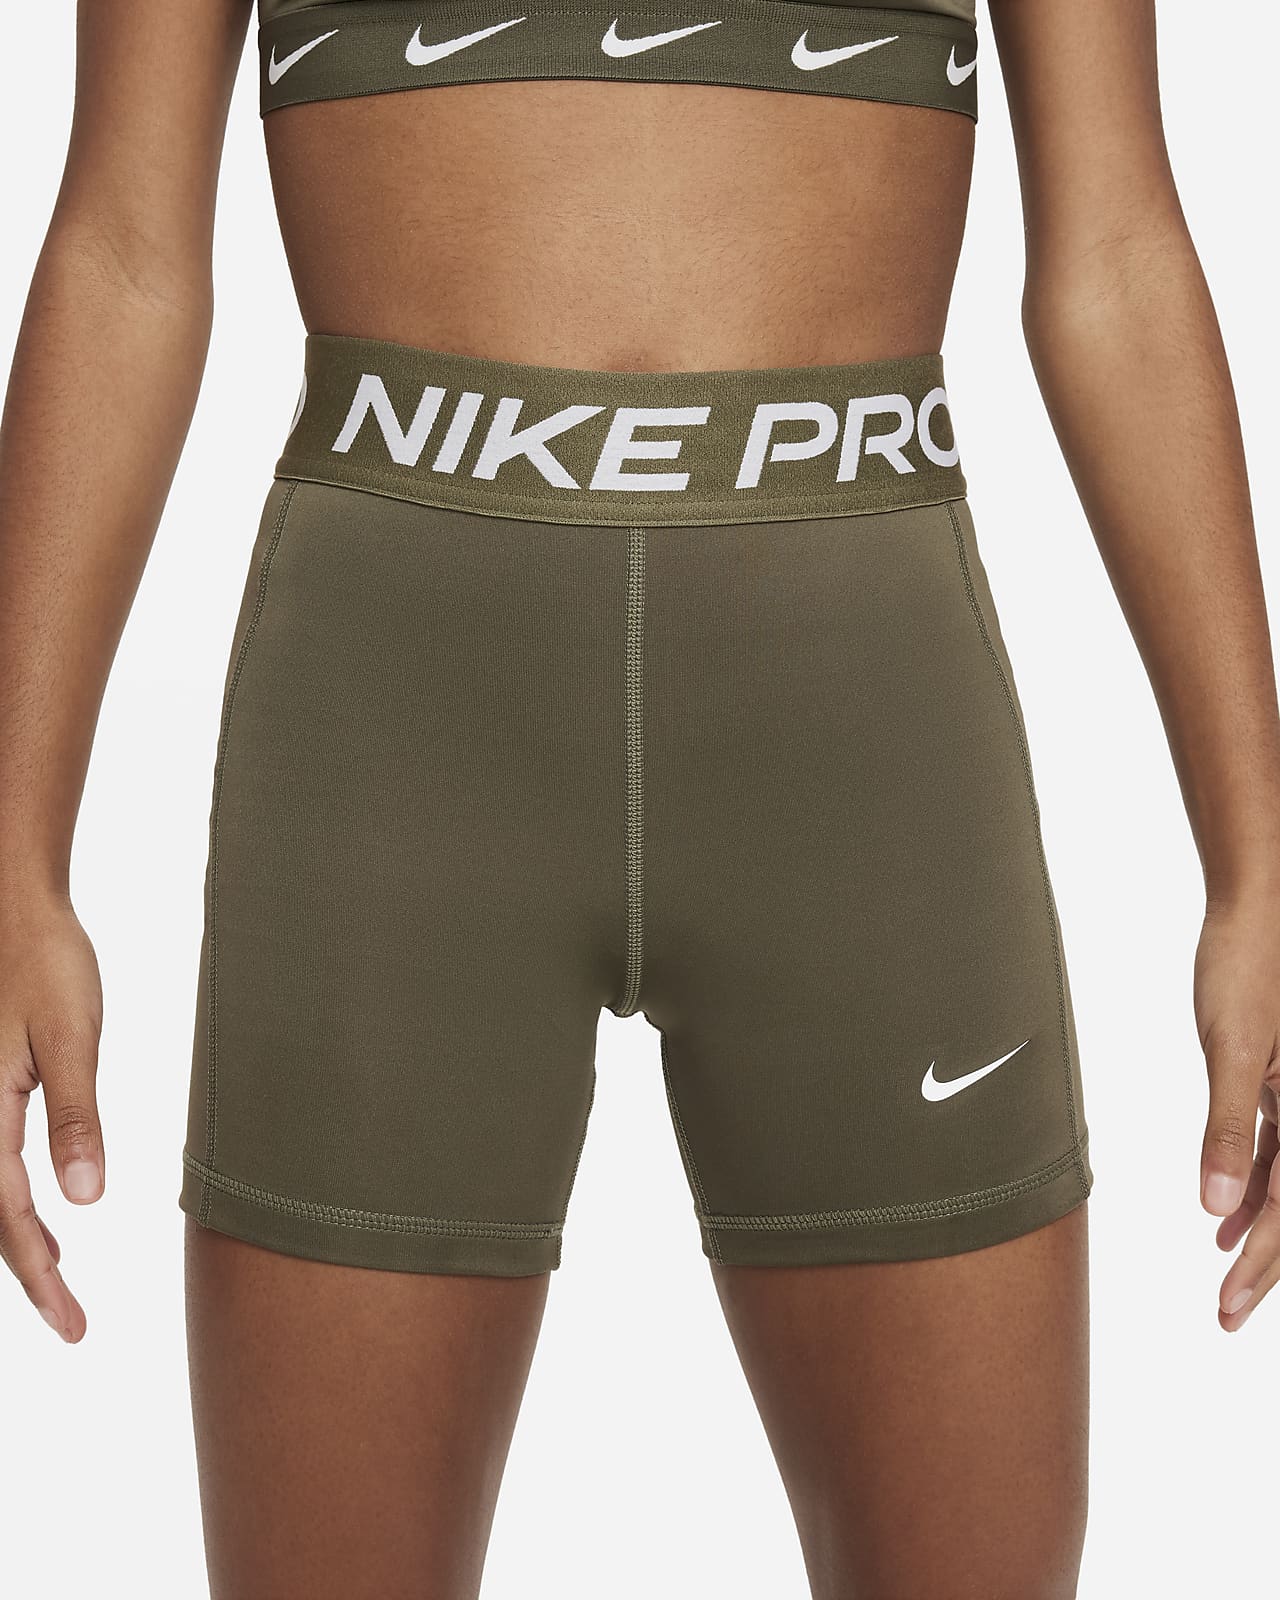 Nike PRO DRI-FIT COOL Compression Brief Shorts NBA Basketball Player  Exclusive